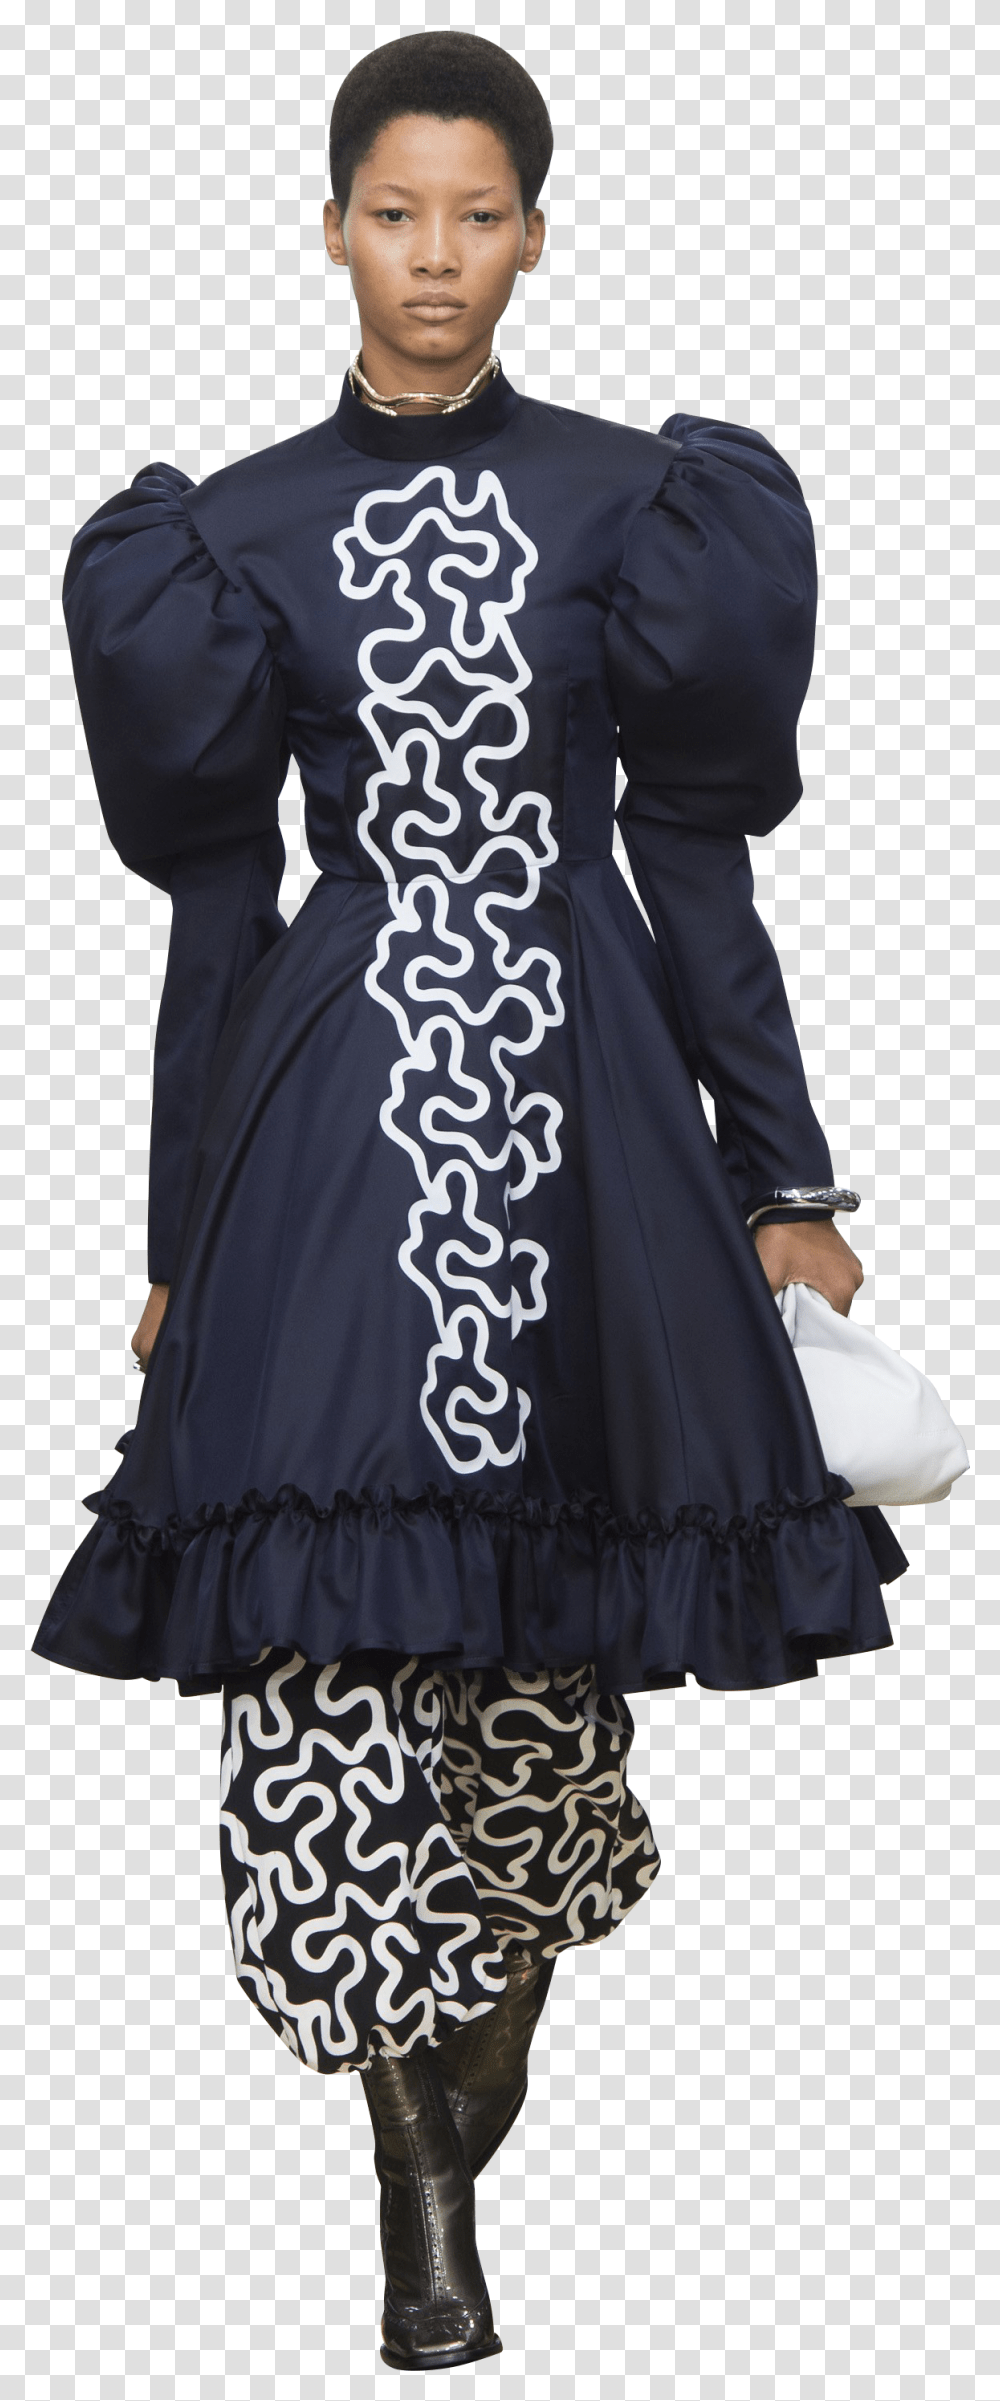 Leg O Mutton Sleeve, Apparel, Coat, Person Transparent Png